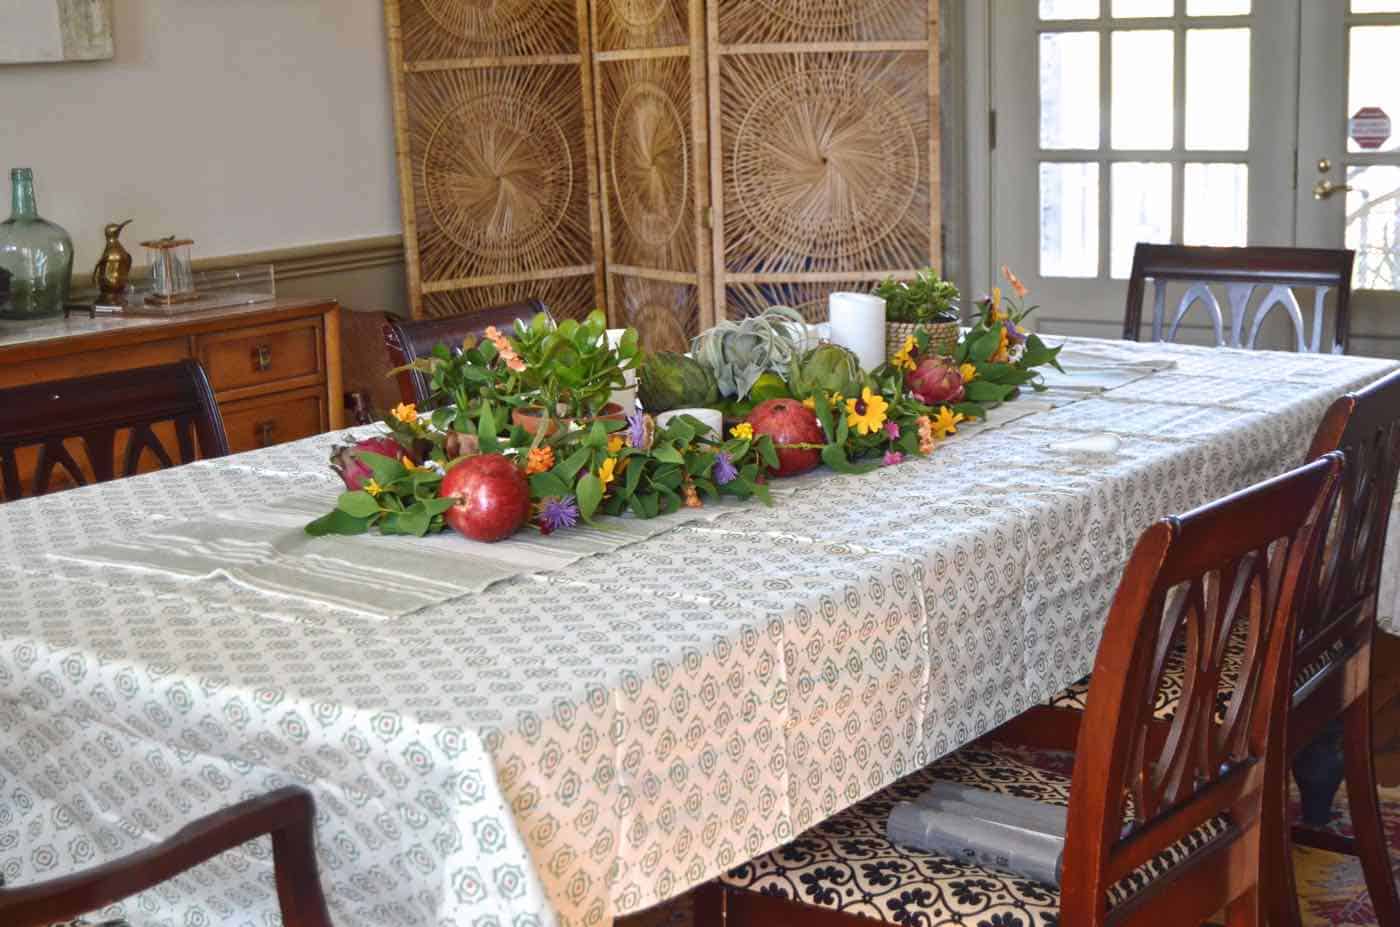 Thanksgiving tablescape with lush greenery and vegetables.